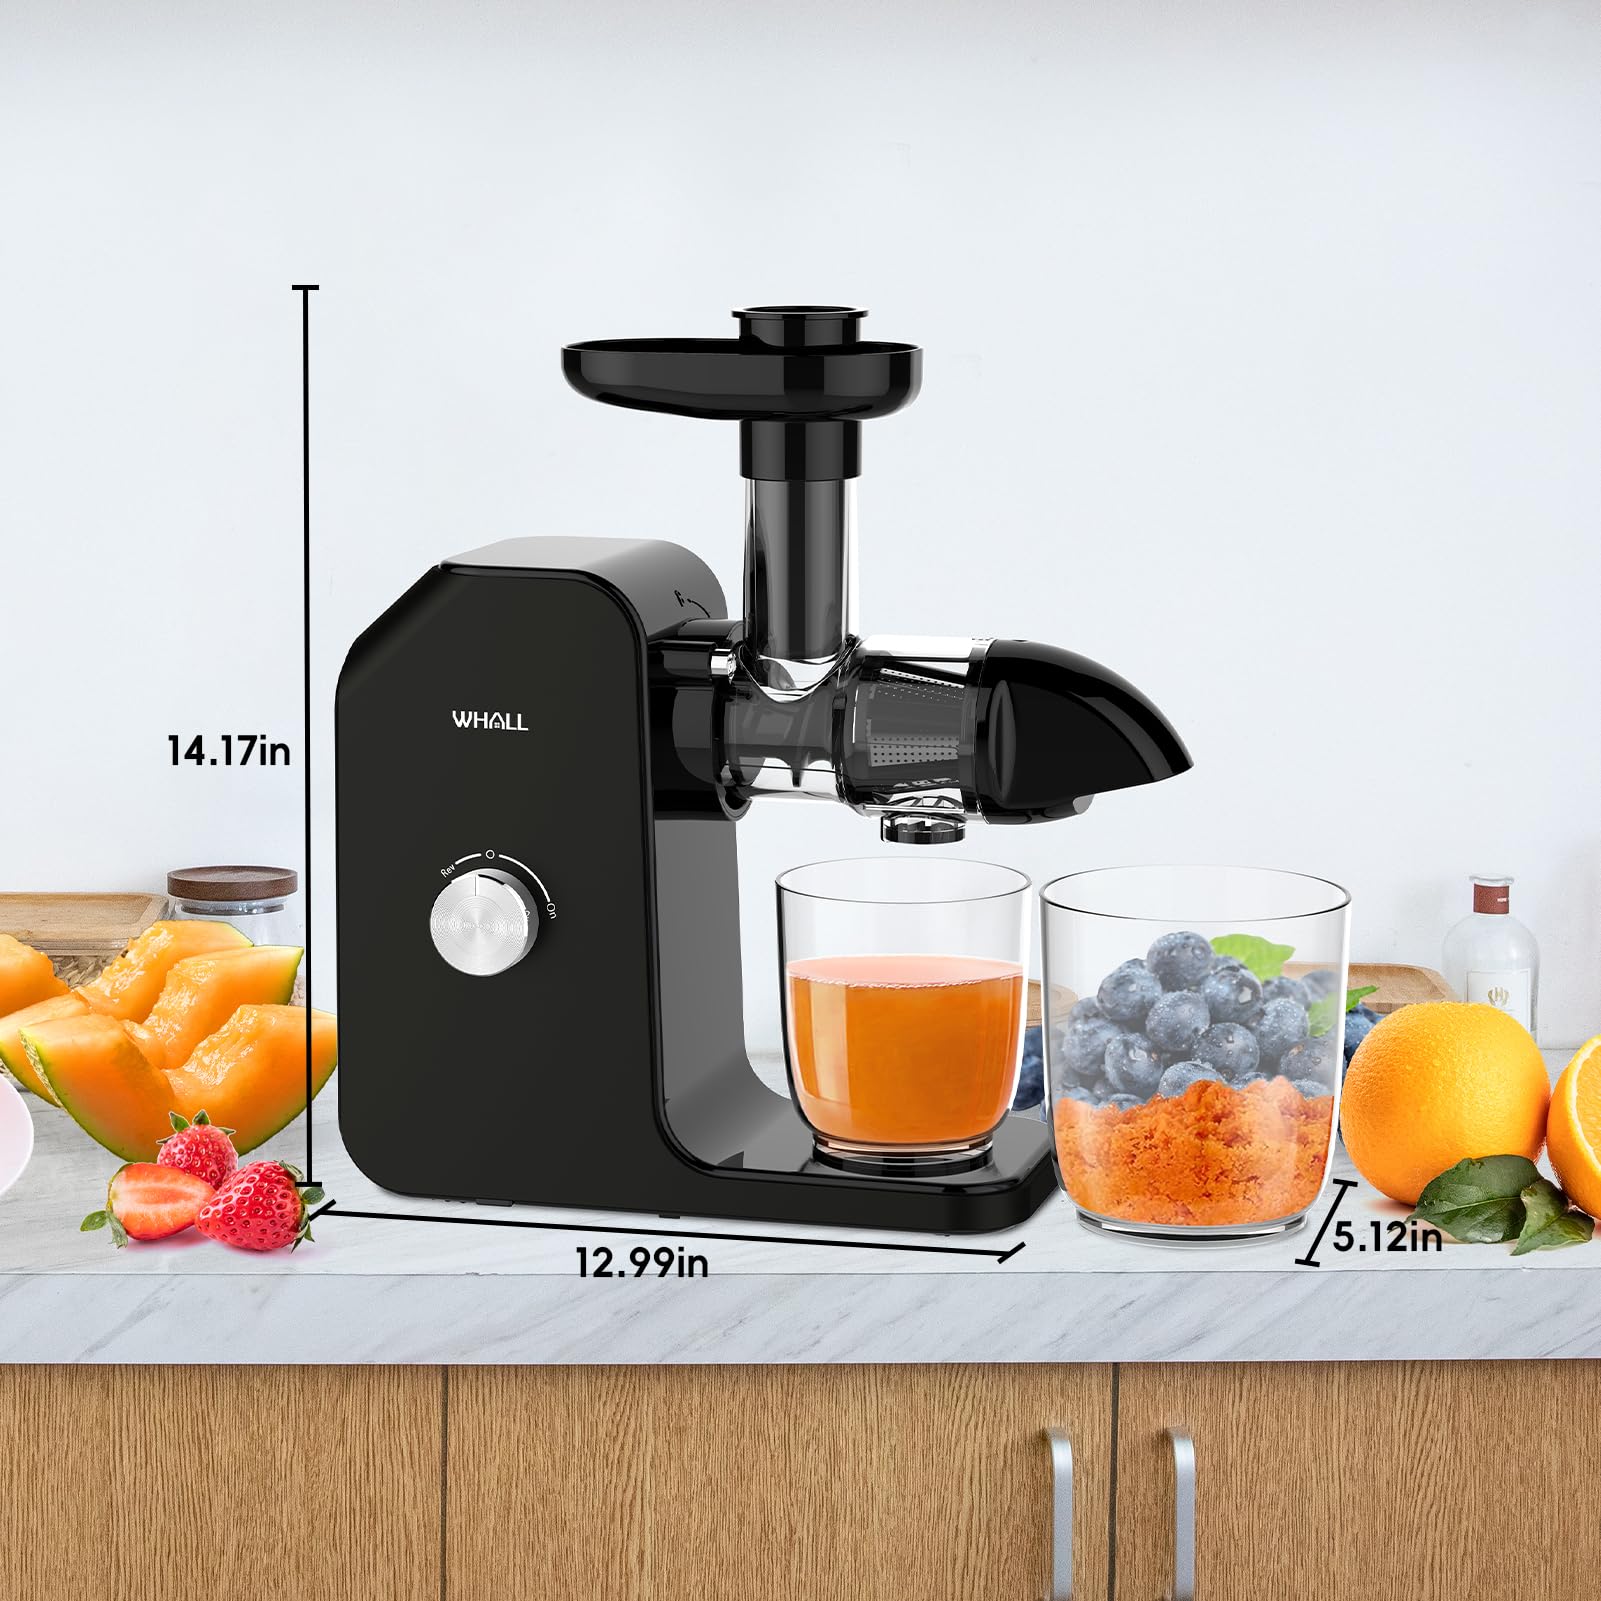 whall Slow Juicer, Masticating Juicer, Celery Juicer Machines, Cold Press Juicer Machines Vegetable and Fruit, Juicers with Quiet Motor & Reverse Function, Easy to Clean with Brush,BPA Free,Black